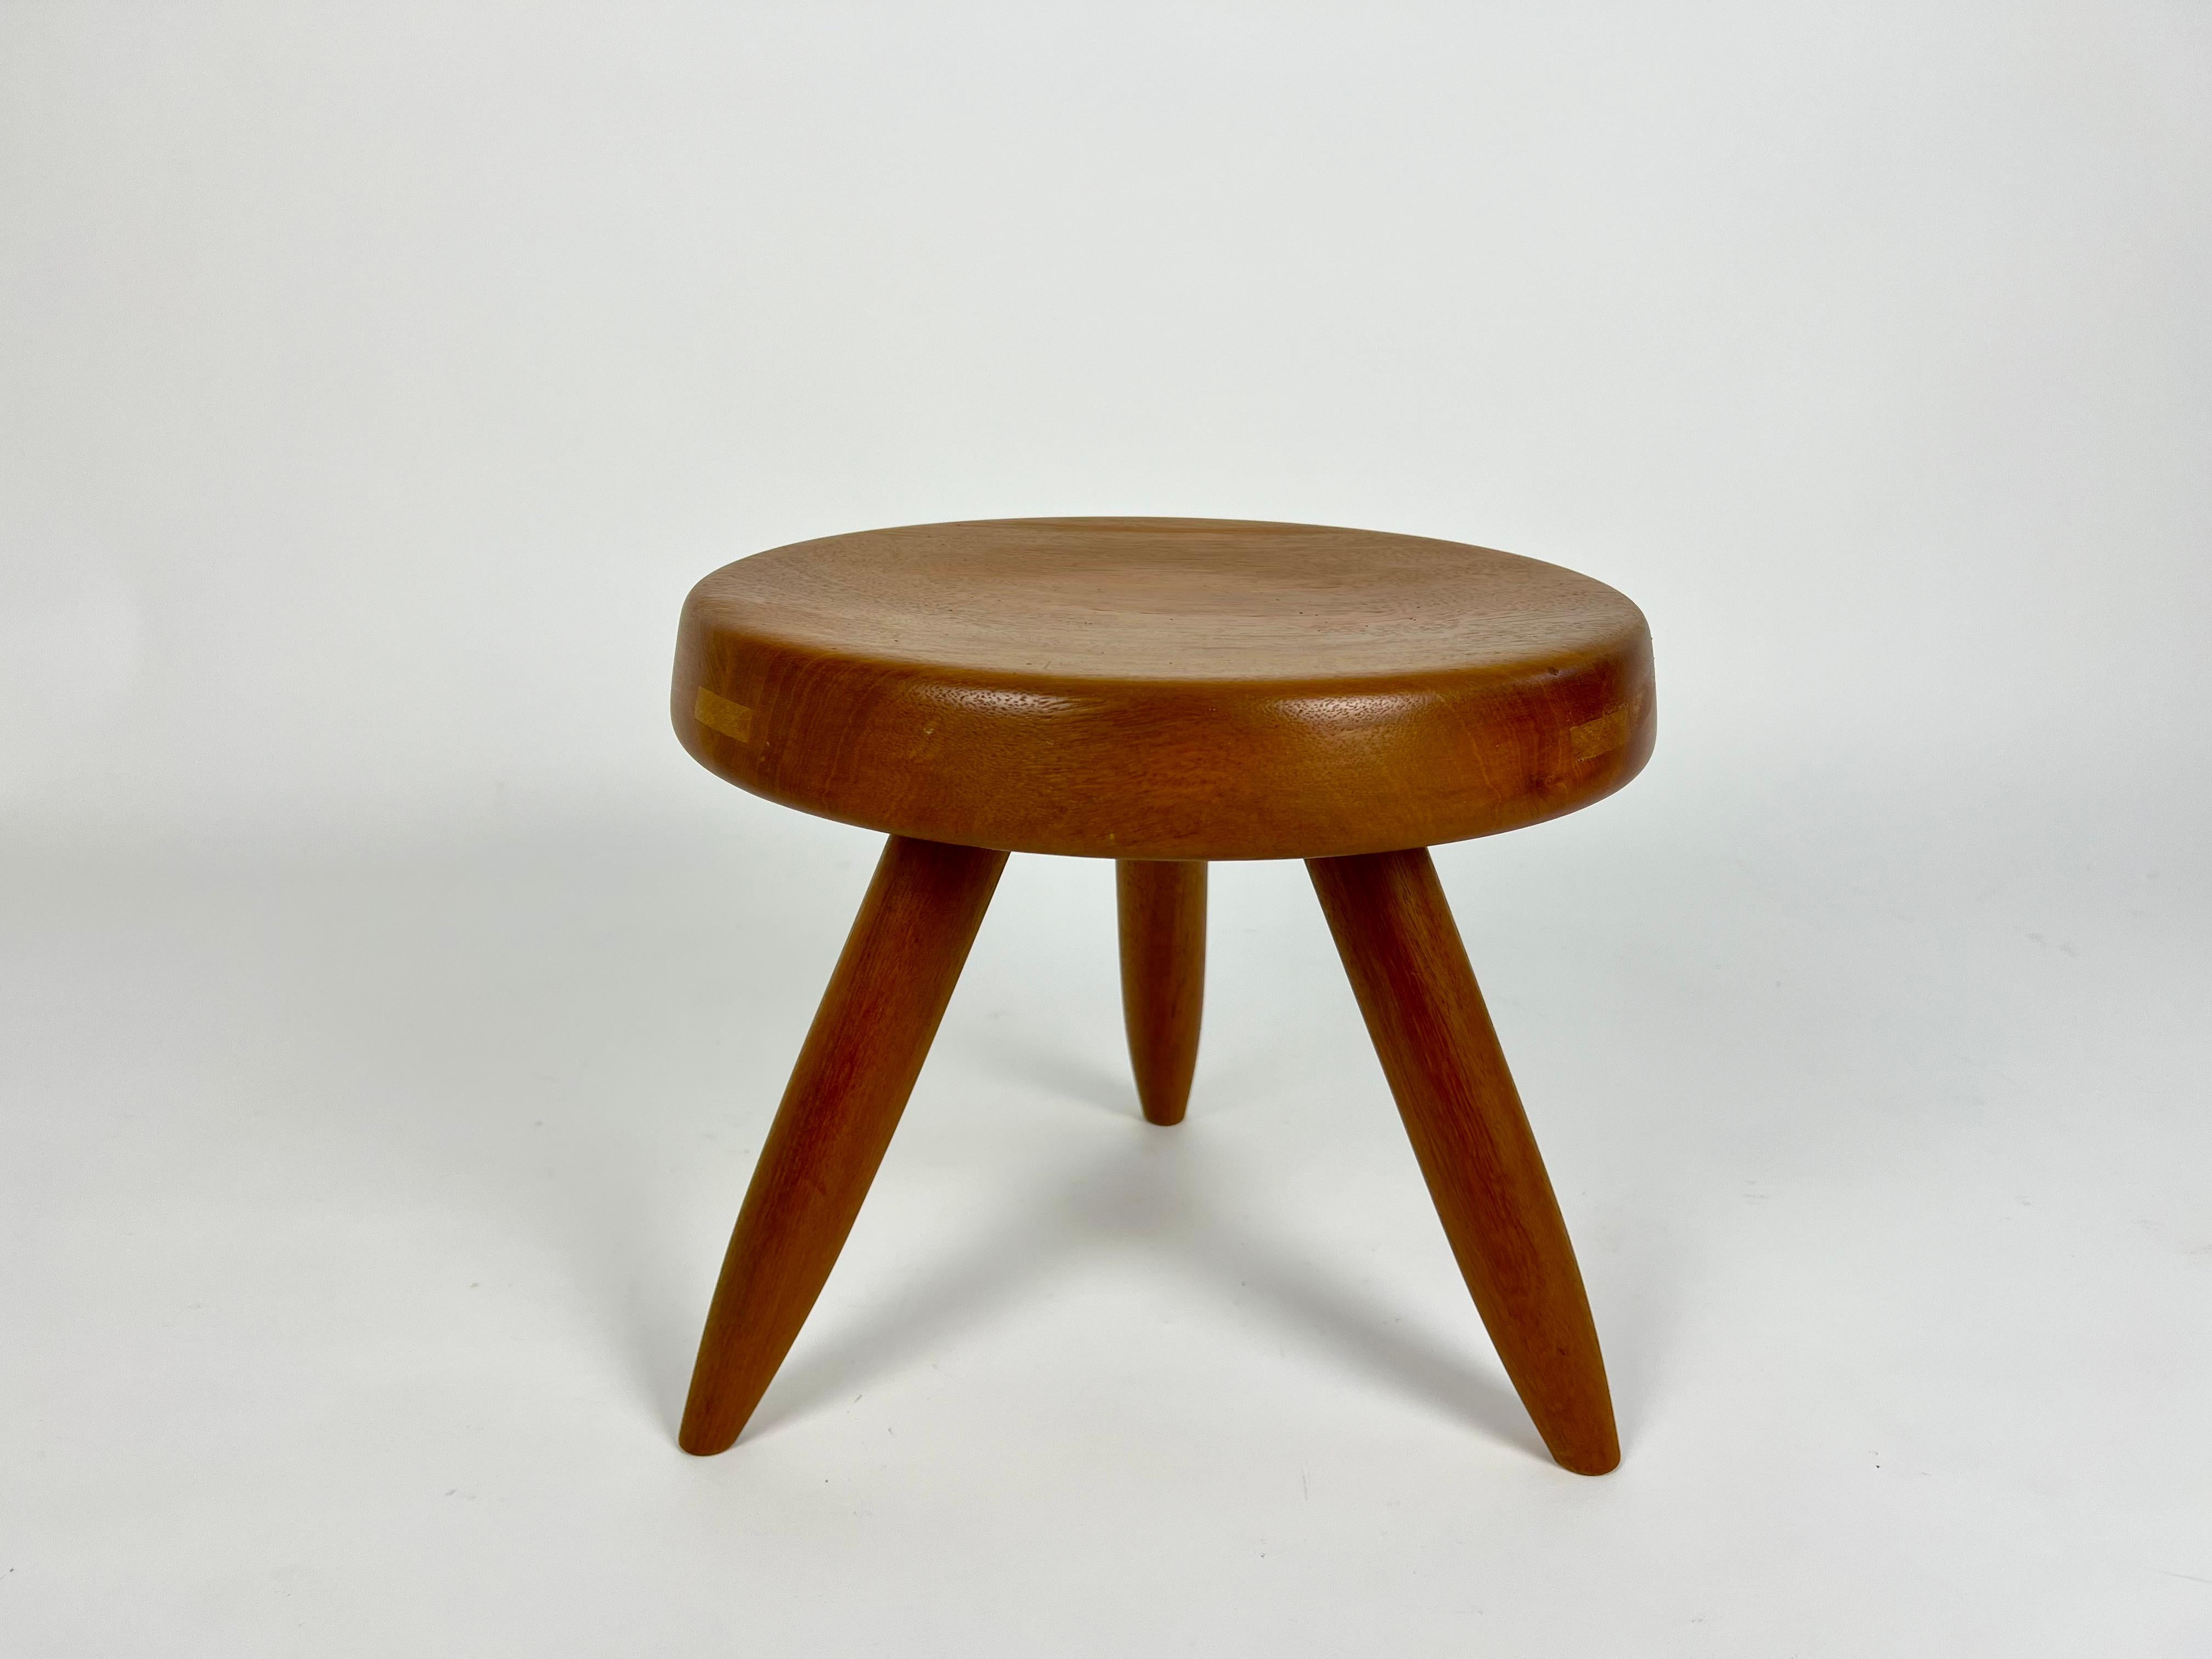 Berger low stool in mahogany, Charlotte Perriand 1